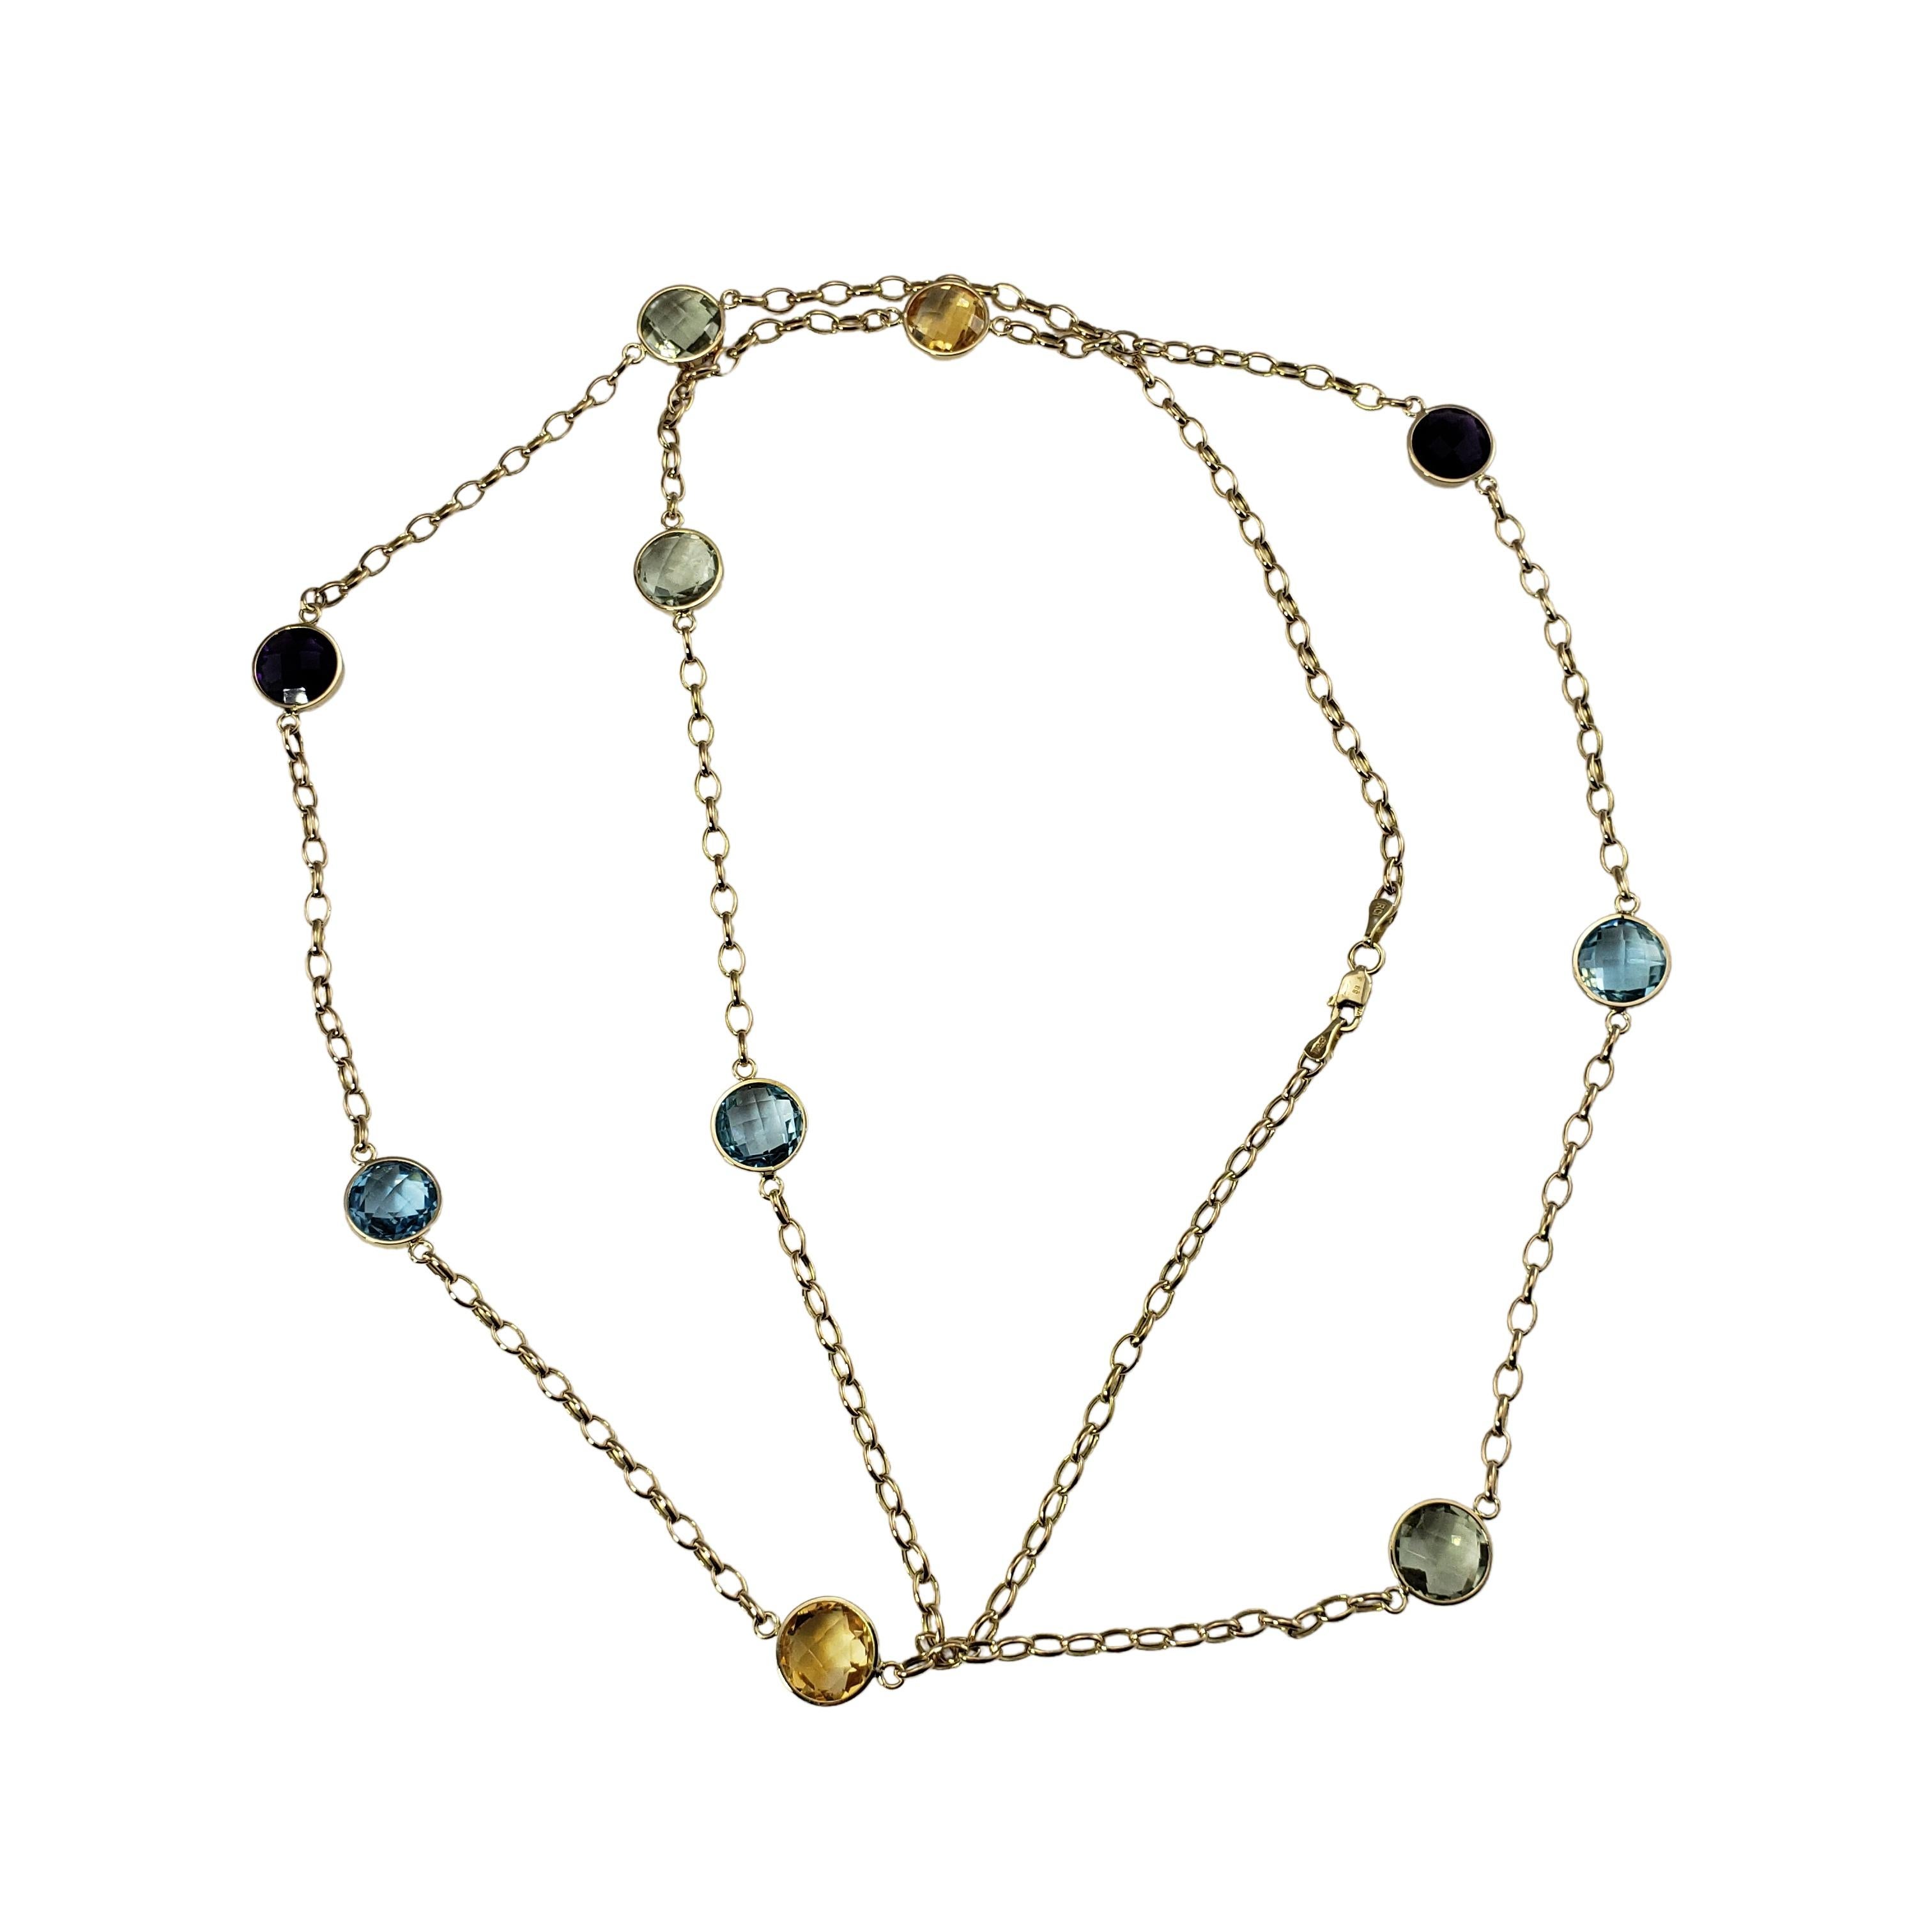 Vintage 14 Karat Yellow Gold Gemstone Necklace-

This stunning necklace features ten round 10 mm gemstones (topaz, citrine, peridot, amethyst) set on a classic 14K yellow gold necklace.

Size: 35.5 inches

Weight:  9.6 dwt. / 15.0  gr.

Stamped: 